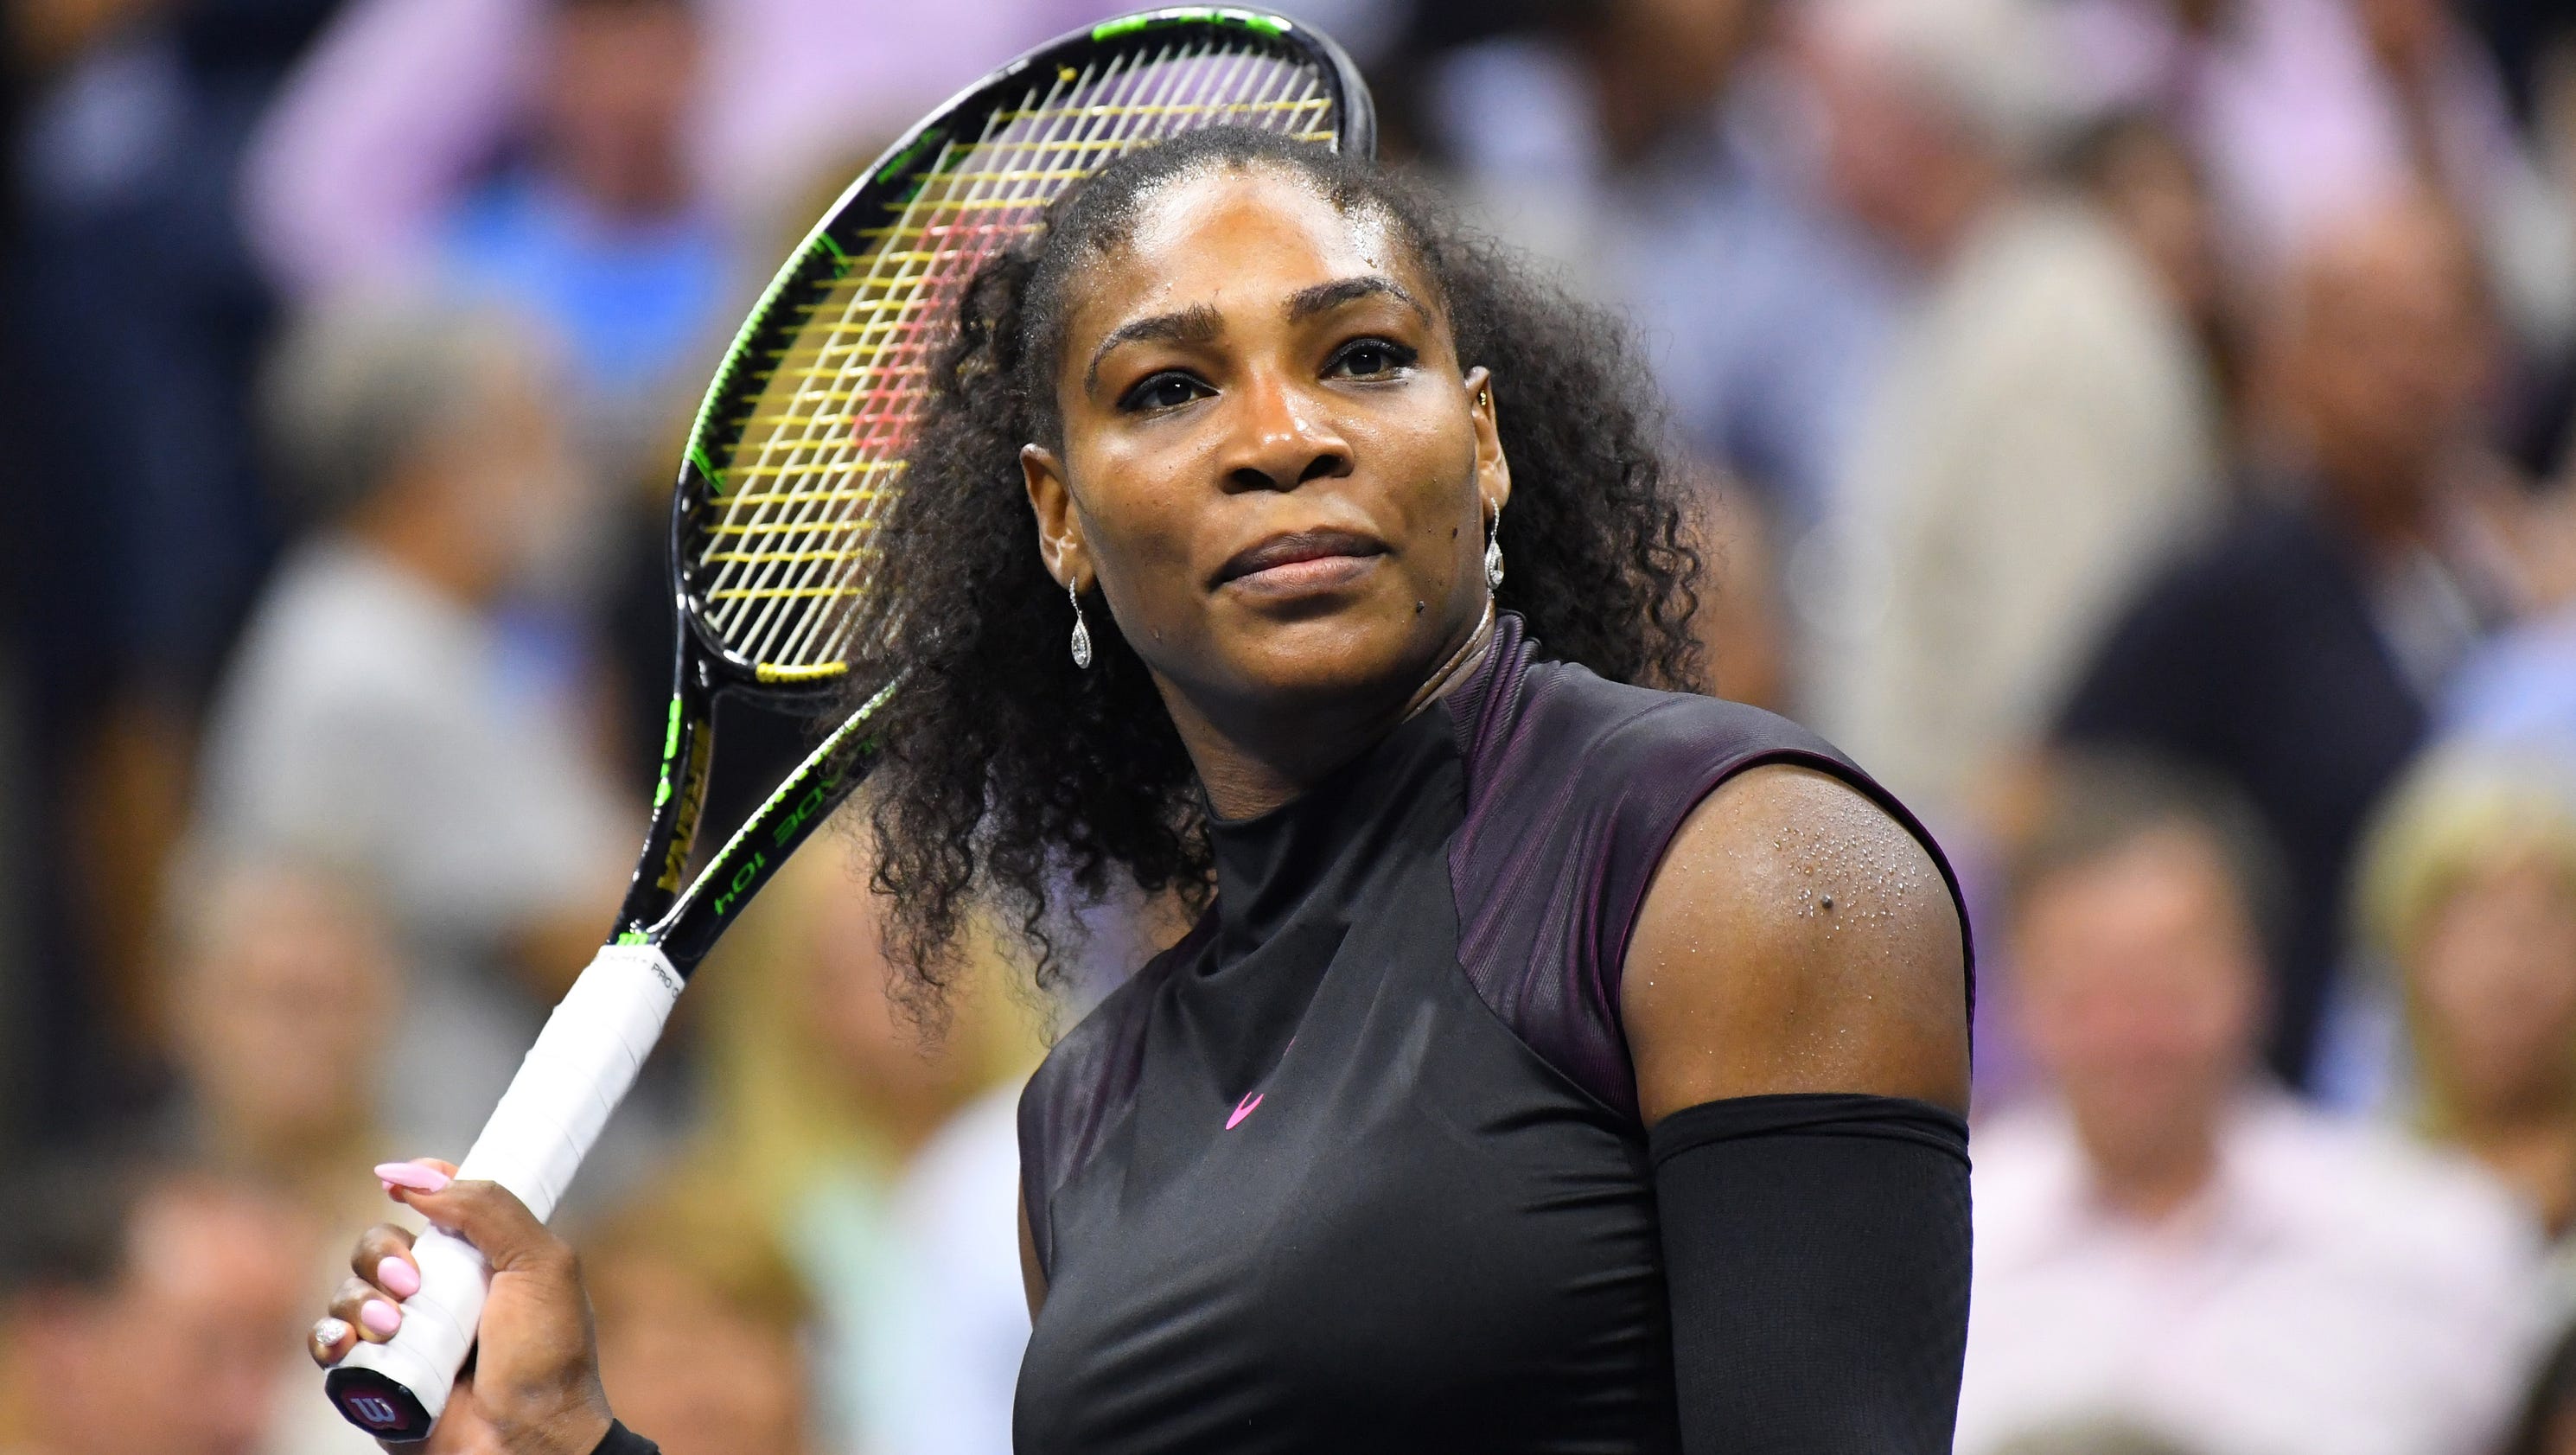 Serena Williams will play in Fed Cup next month